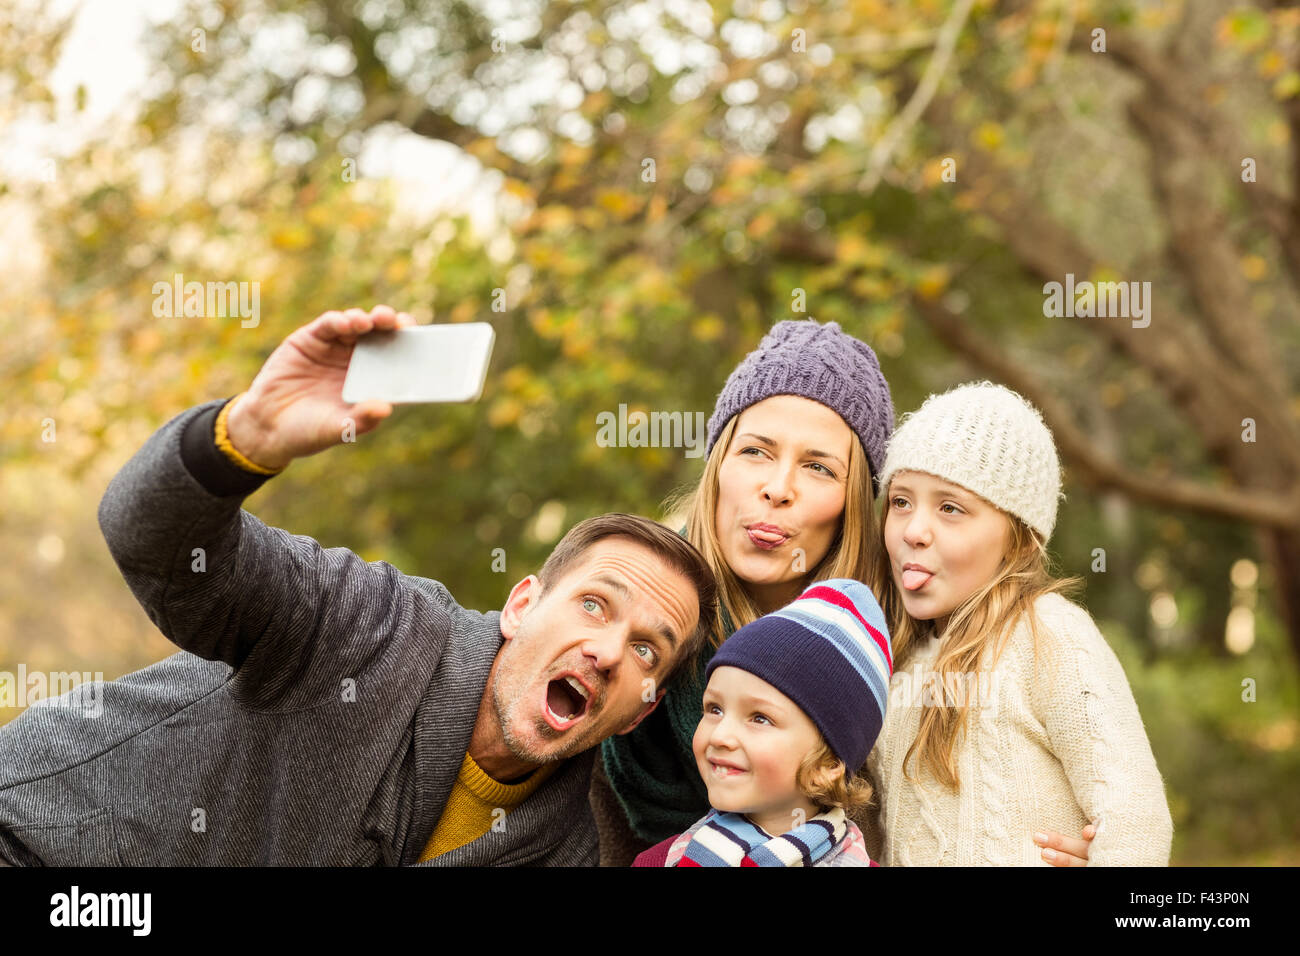 Smiling young family taking selfies Stock Photo